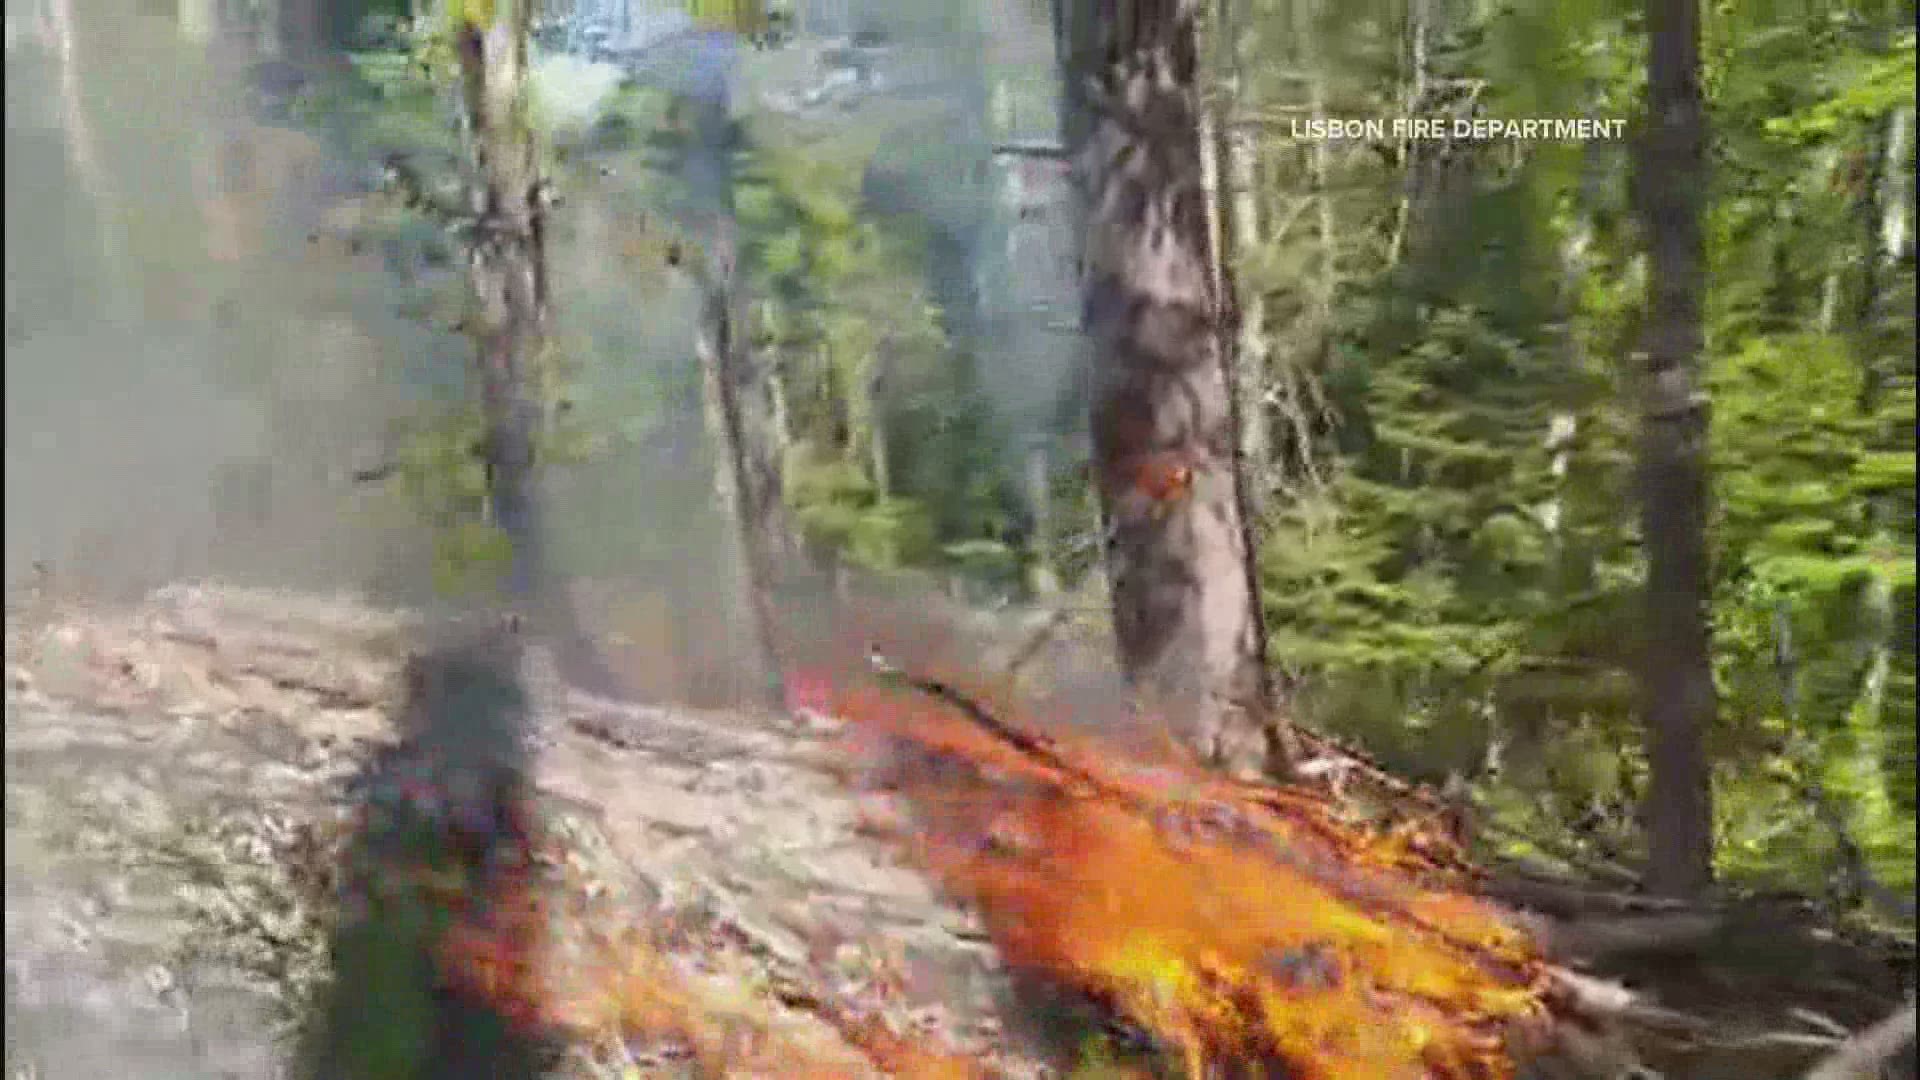 A fire broke out on Friday along an ATV trail. The Maine Forest Service believes the fire was caused by a faulty ATV exhaust.